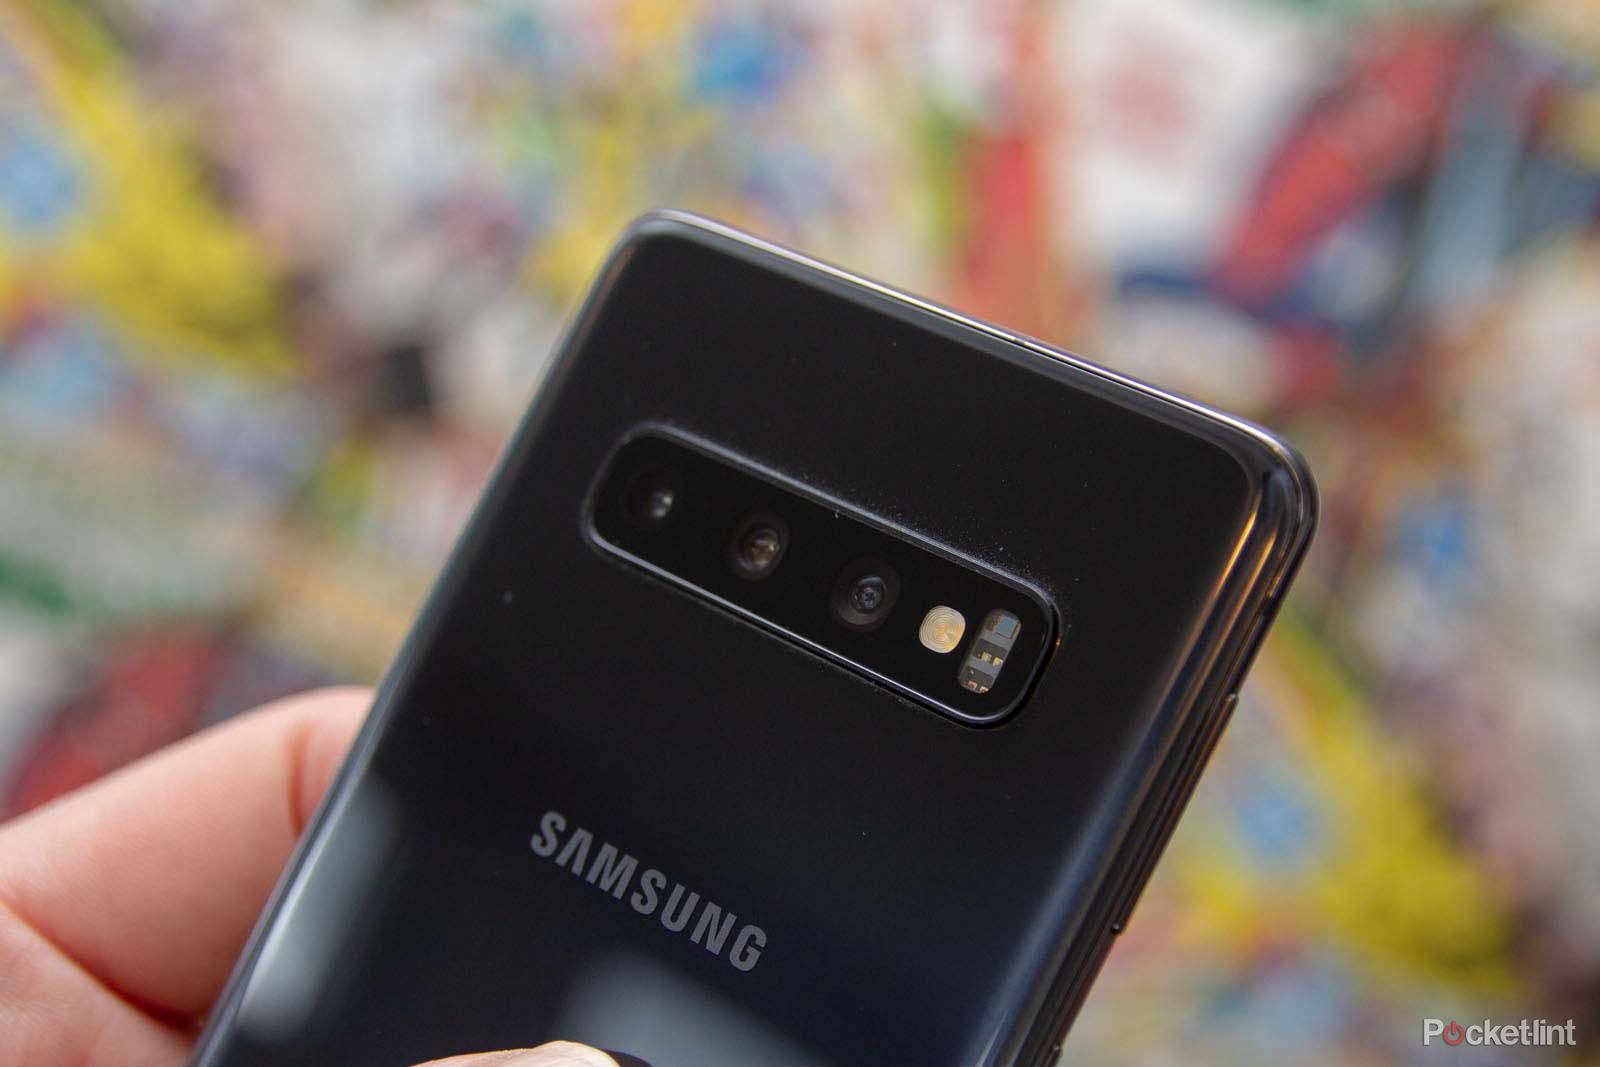 Samsung Galaxy S11 could offer 8K video recording and a 108MP camera image 1